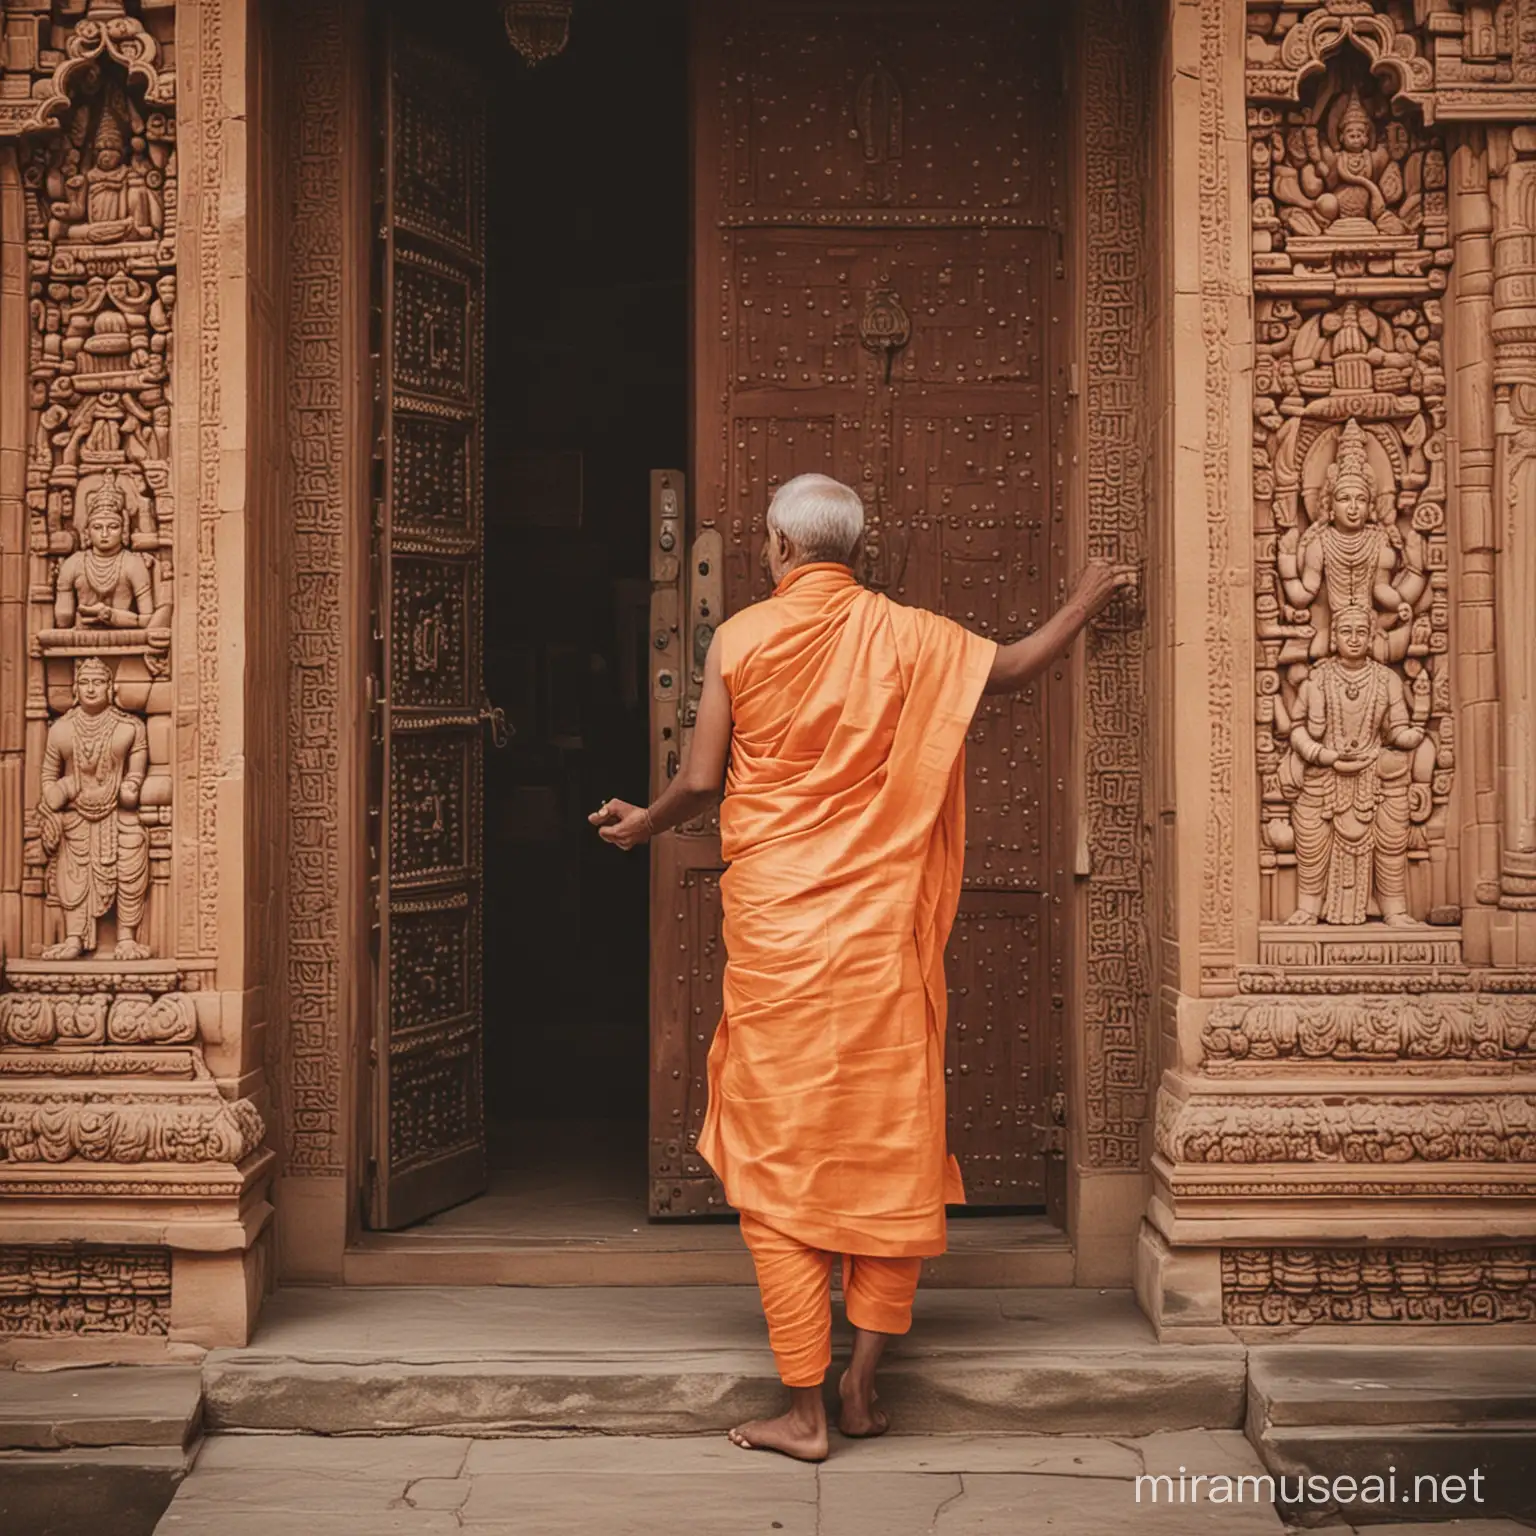 I want a photo in which a Pandit is opening the door of the temple.